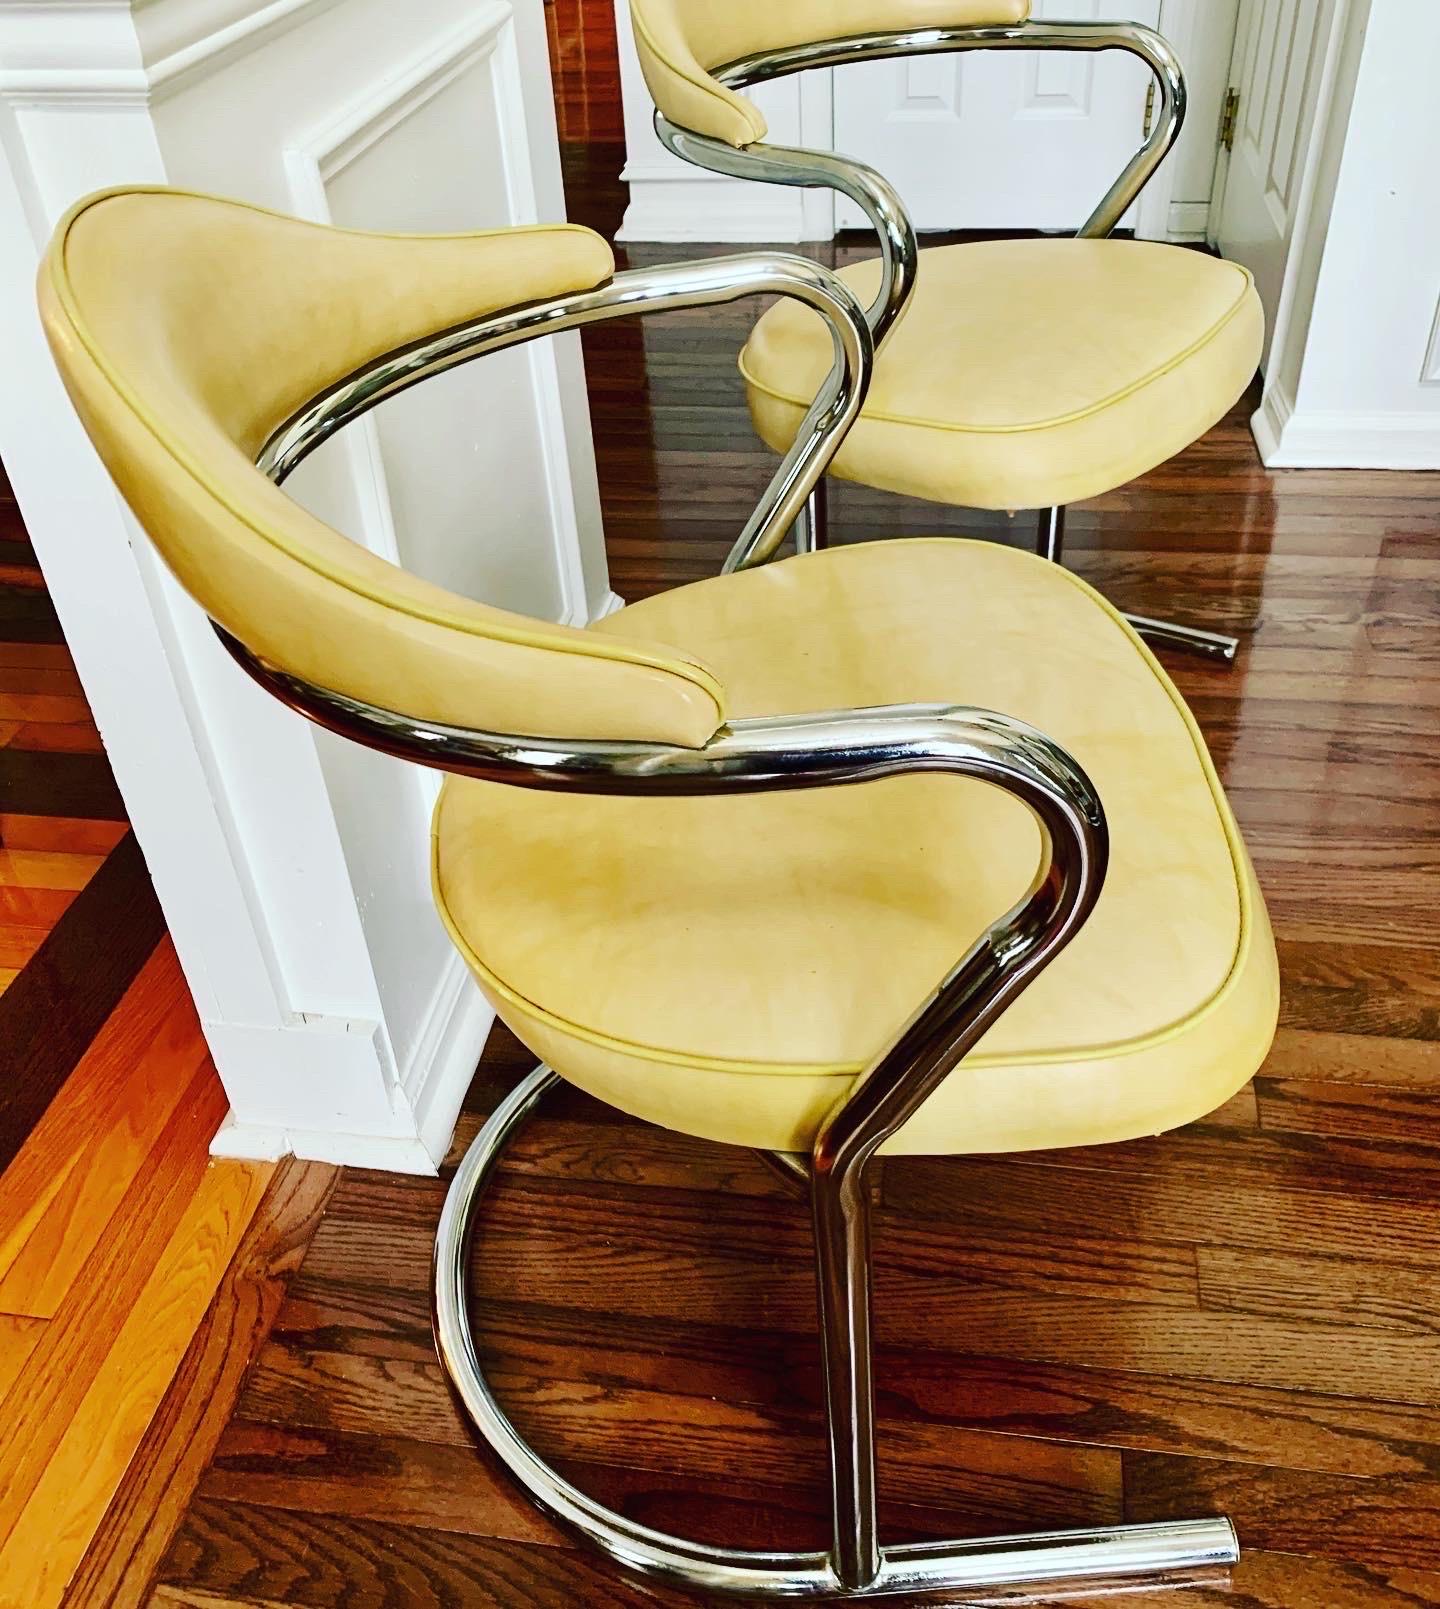 Stylish pair of vintage tubular chrome and naugahyde cantilever chairs by Daystrom. Perfect for dining, side or office chairs. Comfortable and sturdy, this pair has been well care for. The seat and back are in a buttery shade with slight contrast